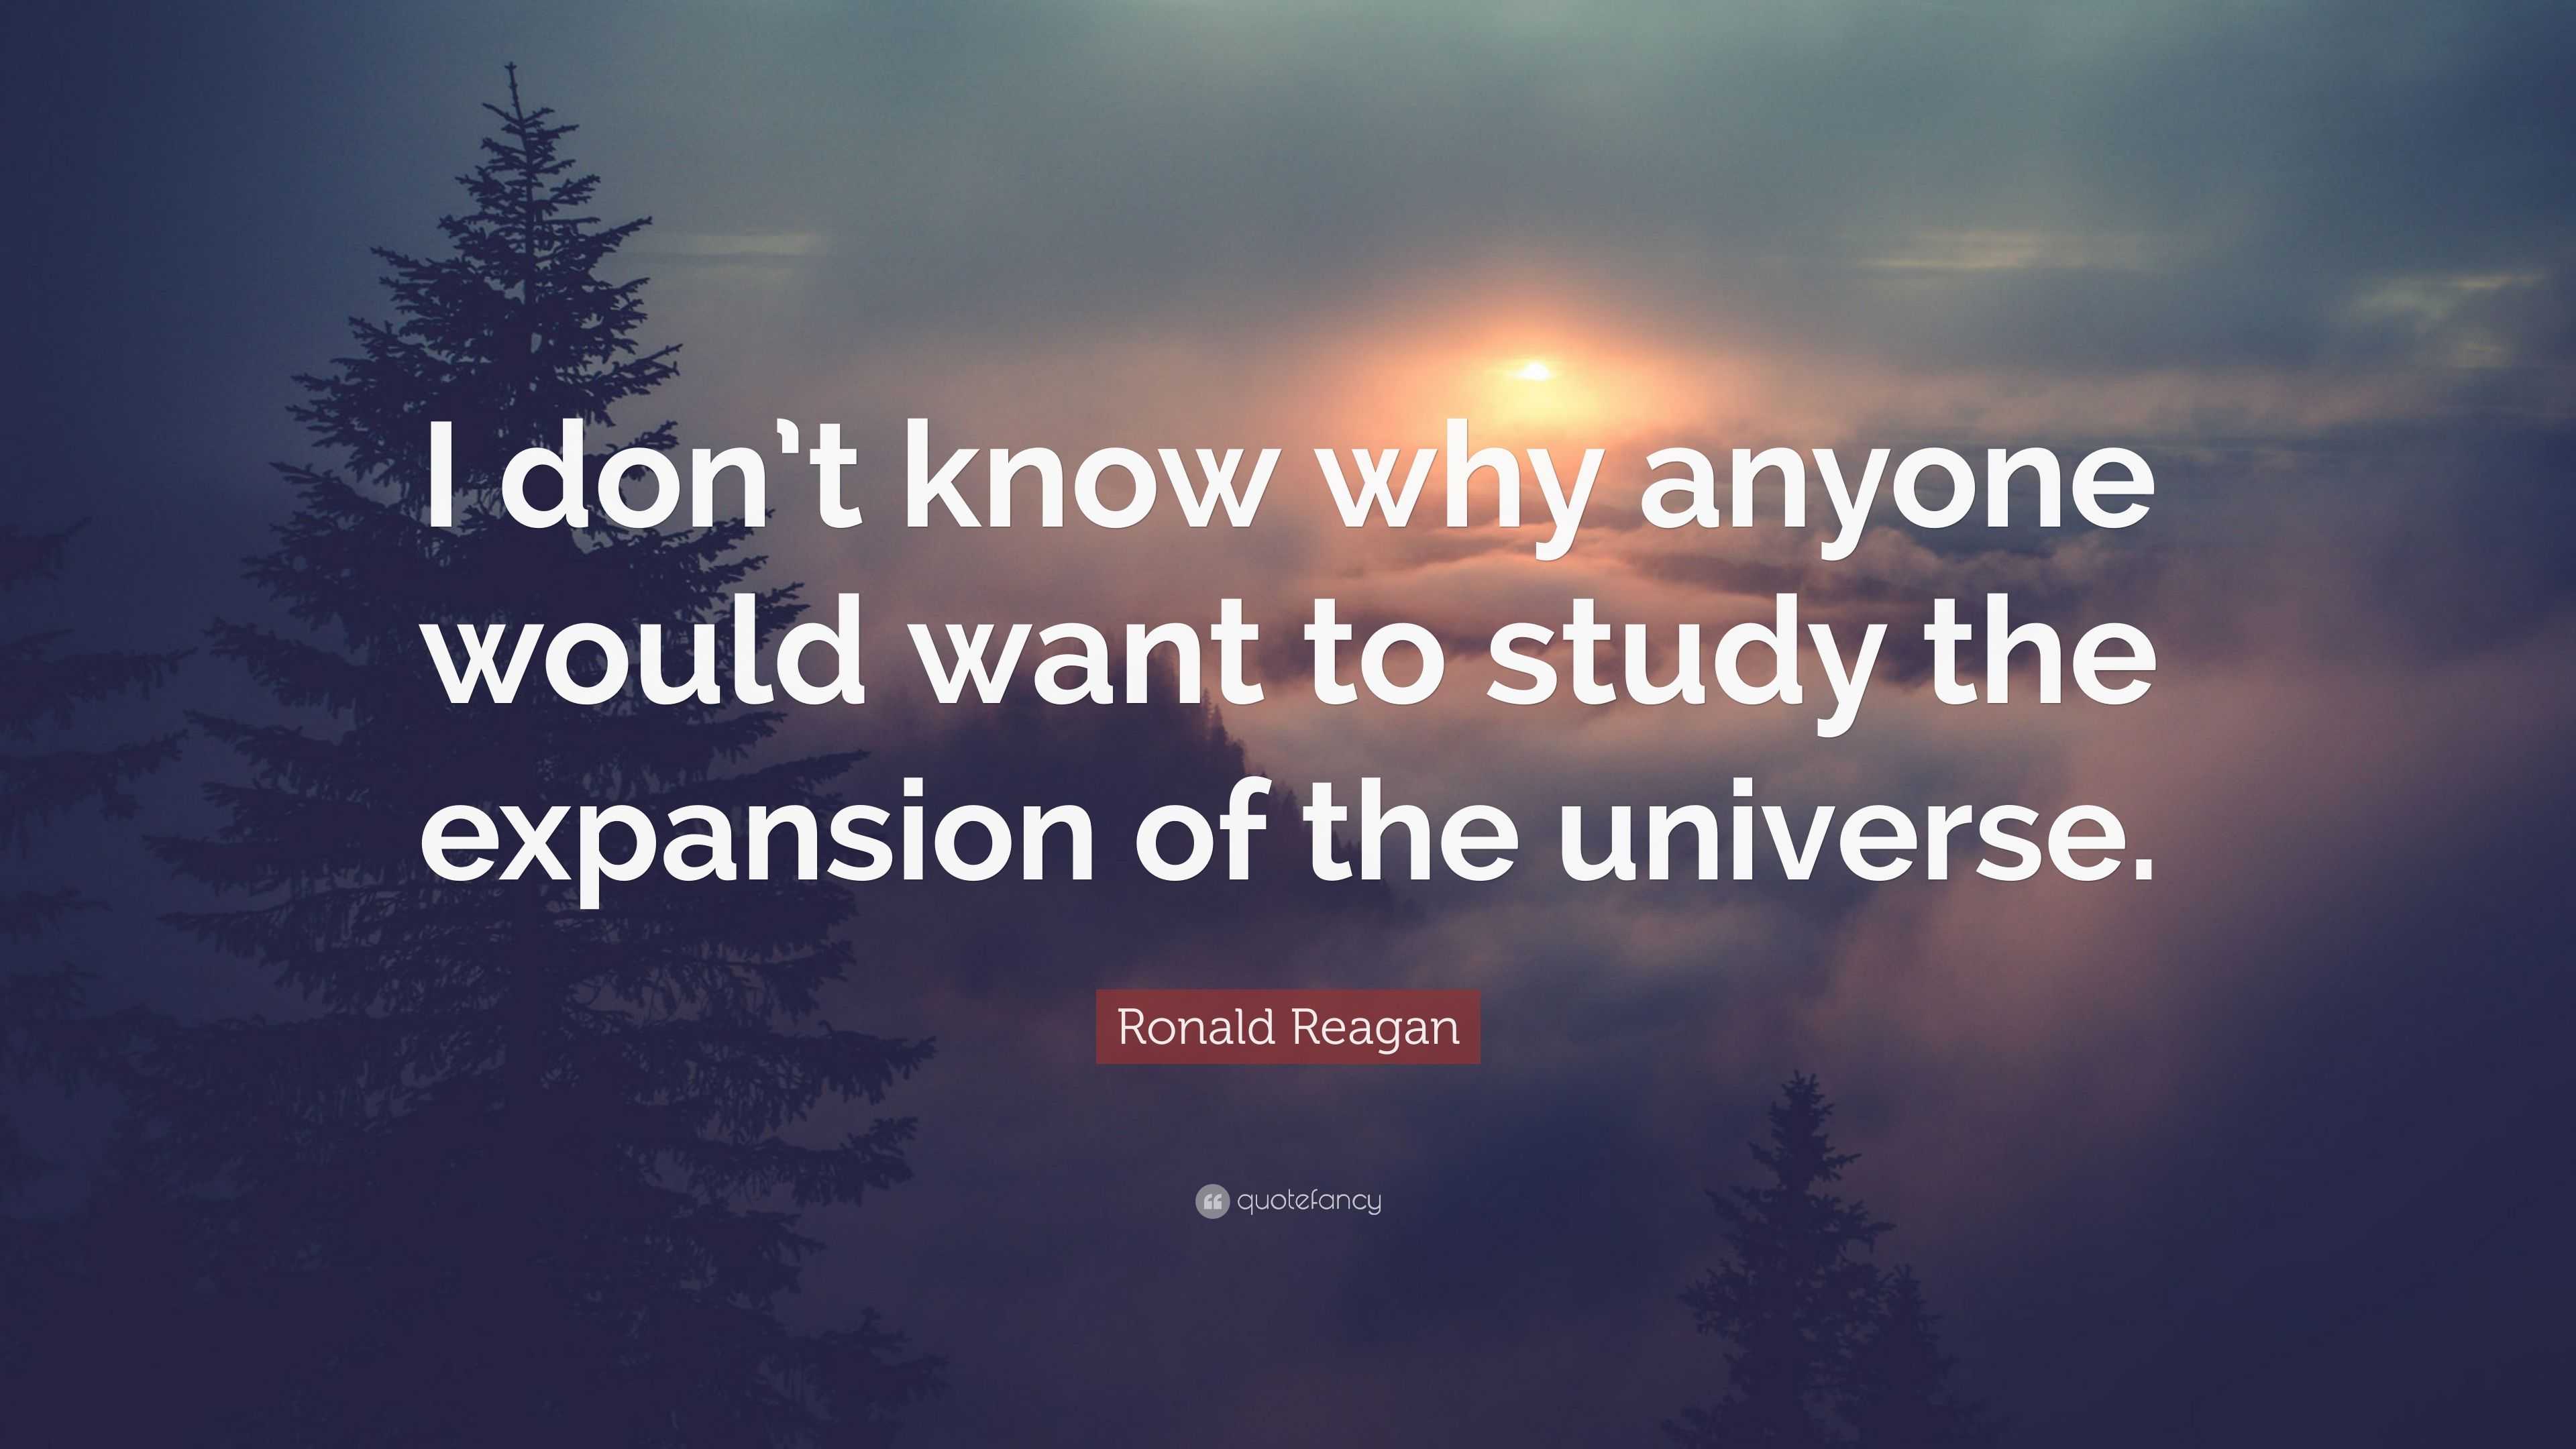 Ronald Reagan Quote: “I don’t know why anyone would want to study the ...